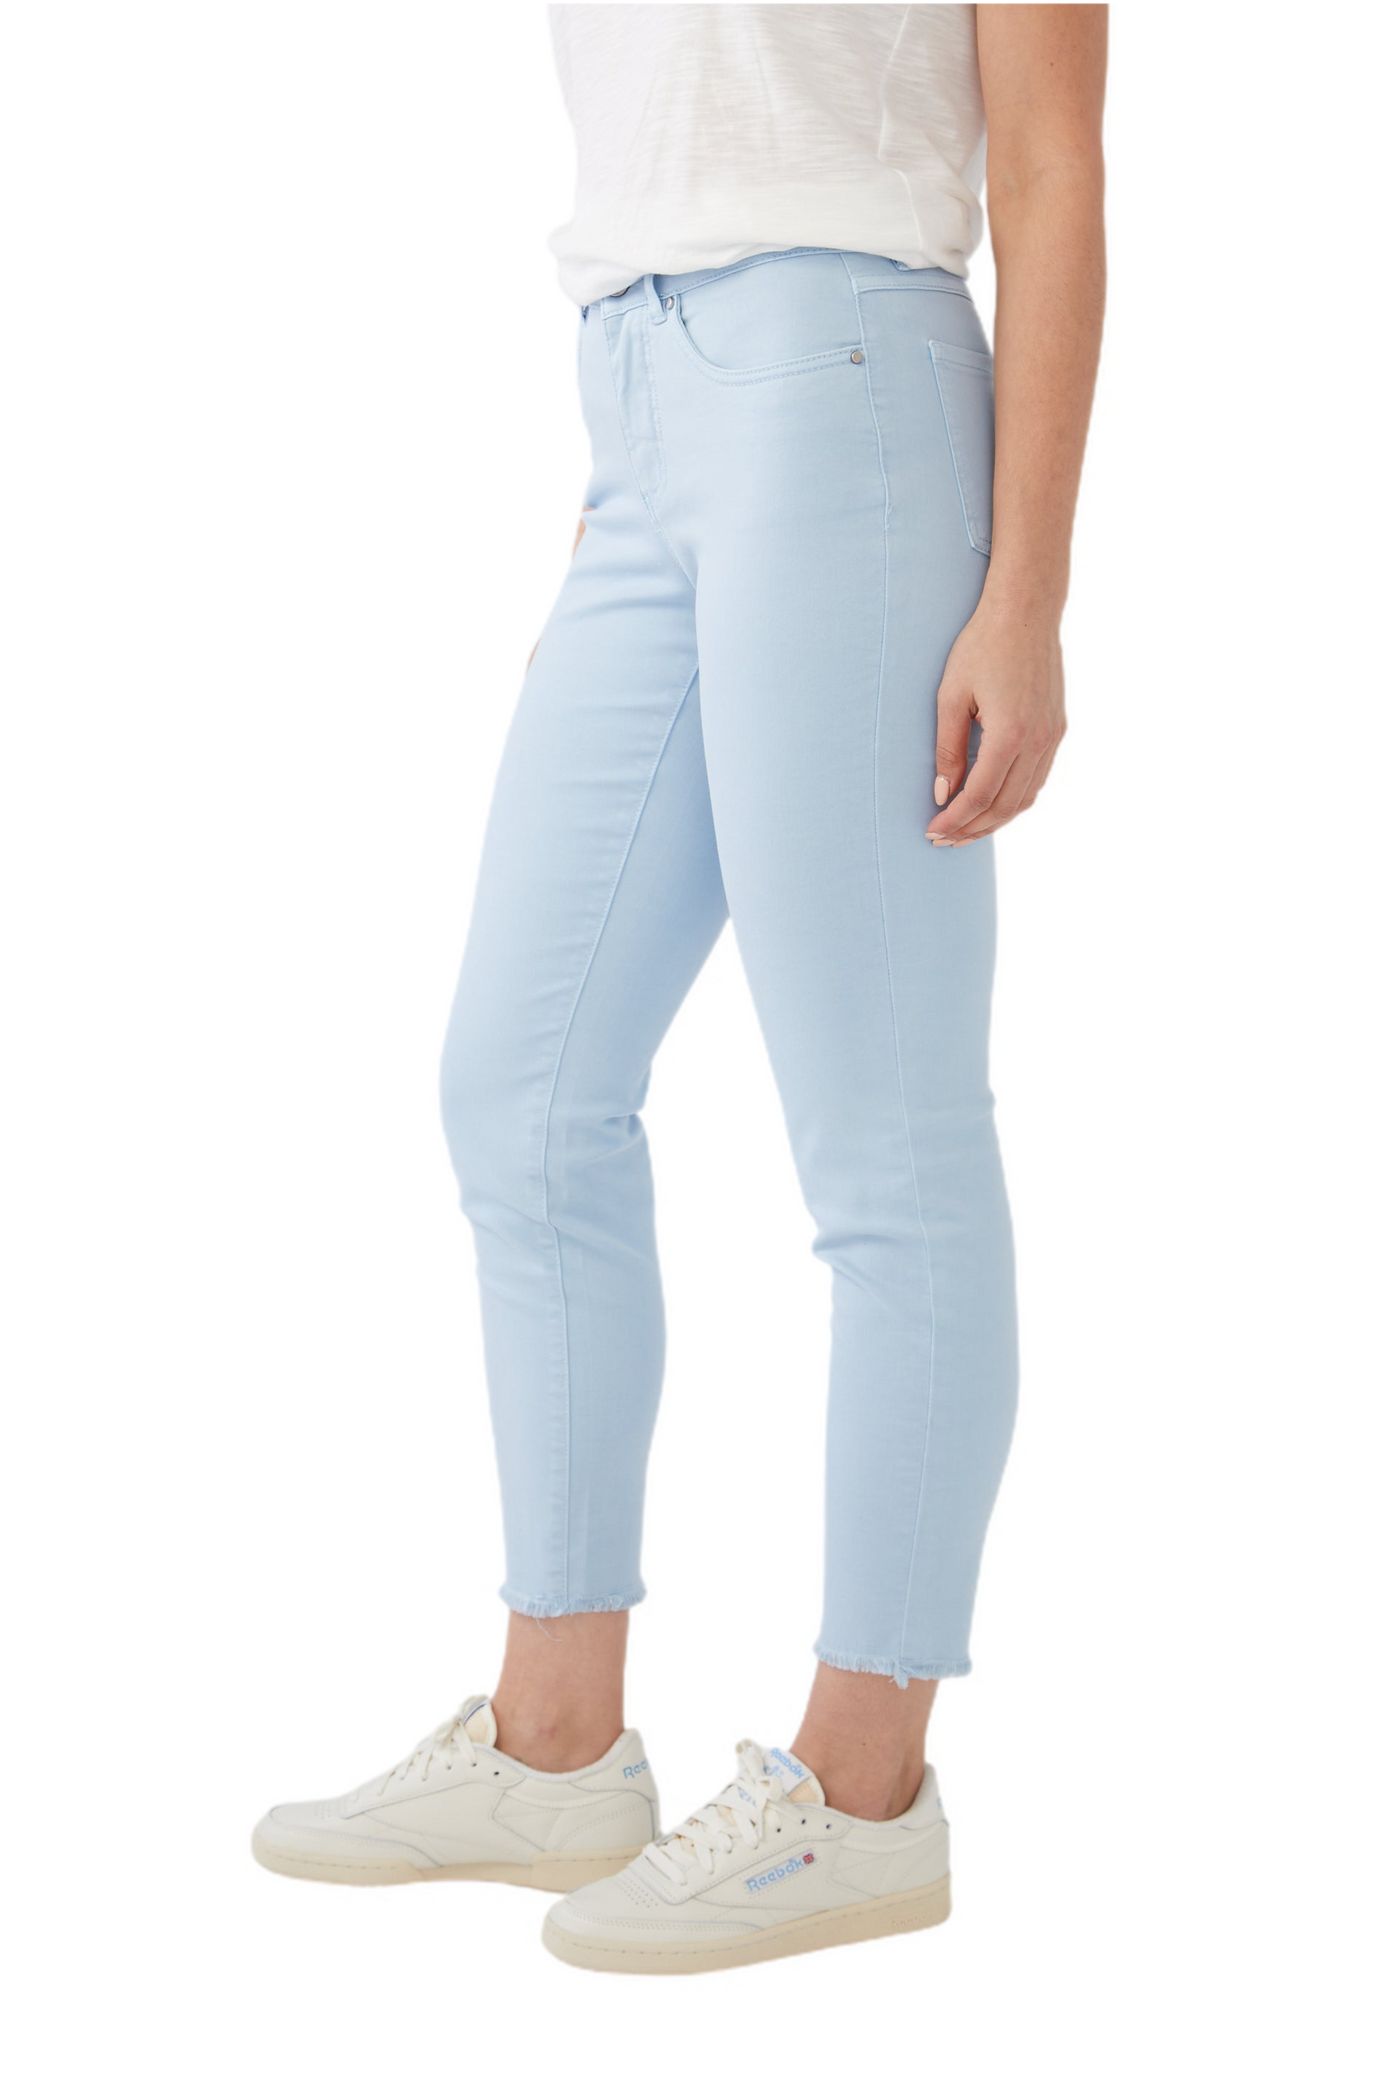 Olivia Slim Ankle in Euro Twill French Dressing Jeans